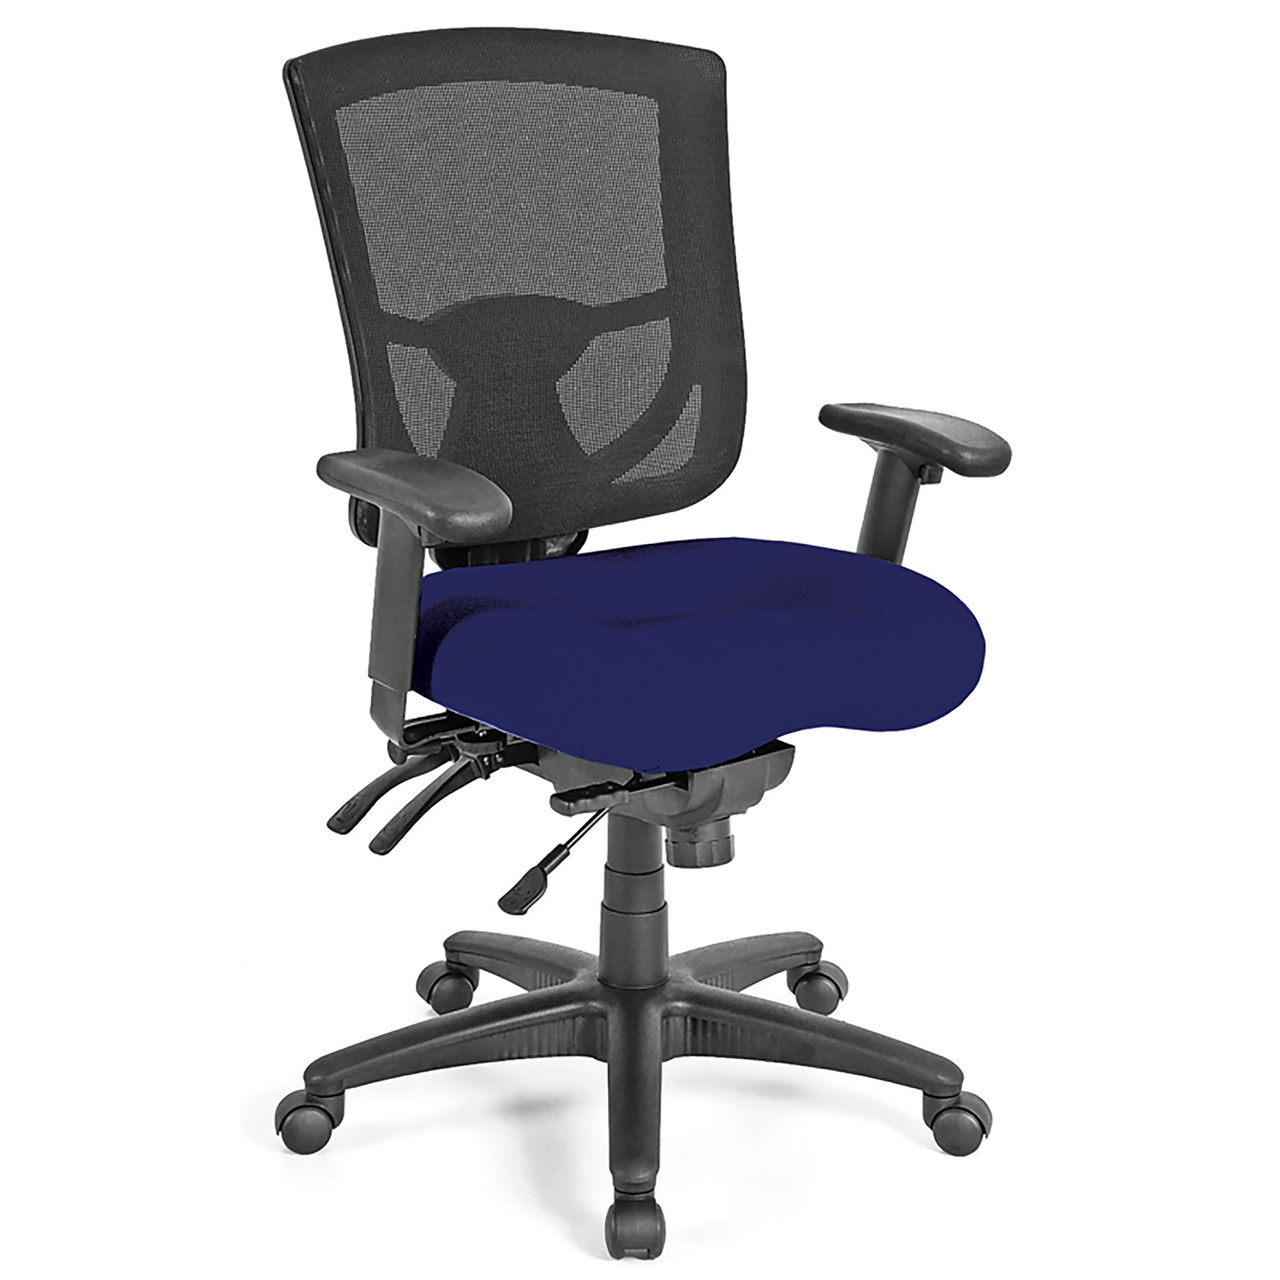 Gaming Chair with Adjustable Mesh Back-Blue - Blue